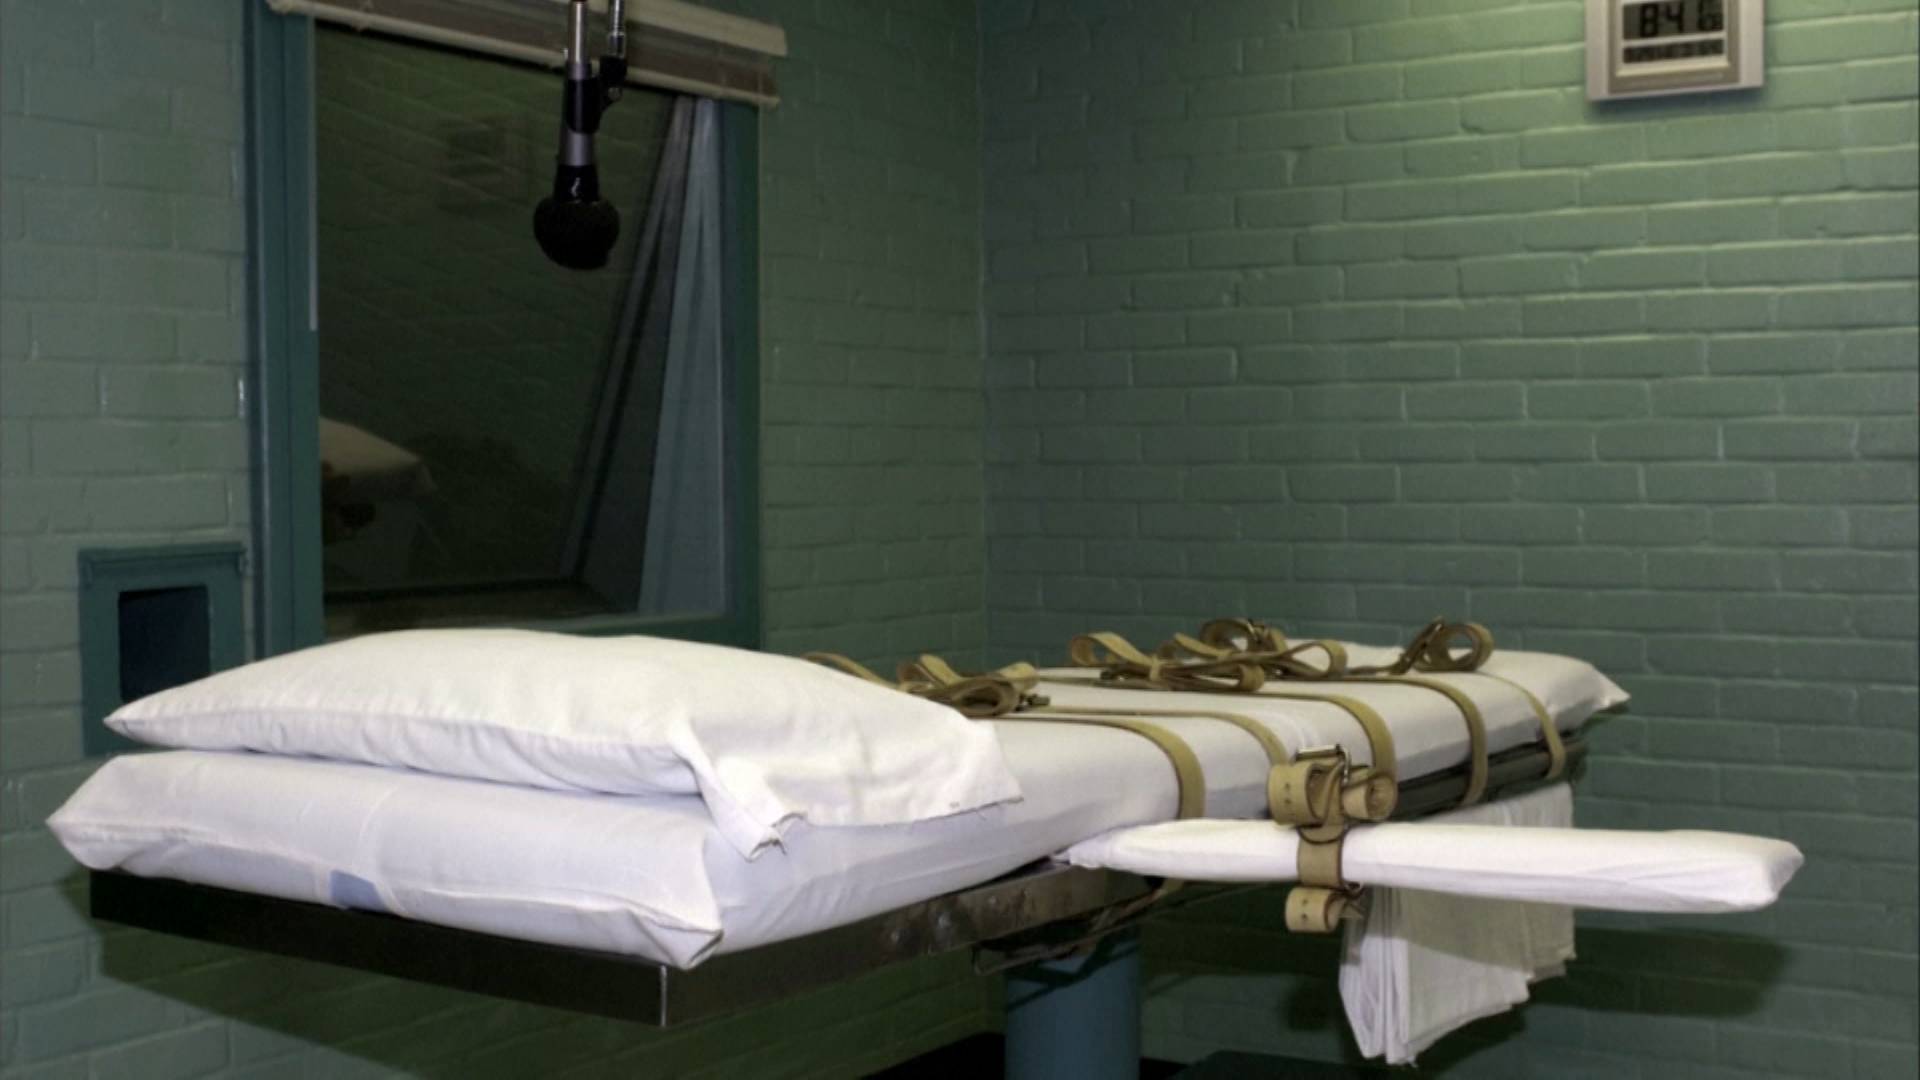 Amnesty International notes that the use of the death penalty increased globally in 2021